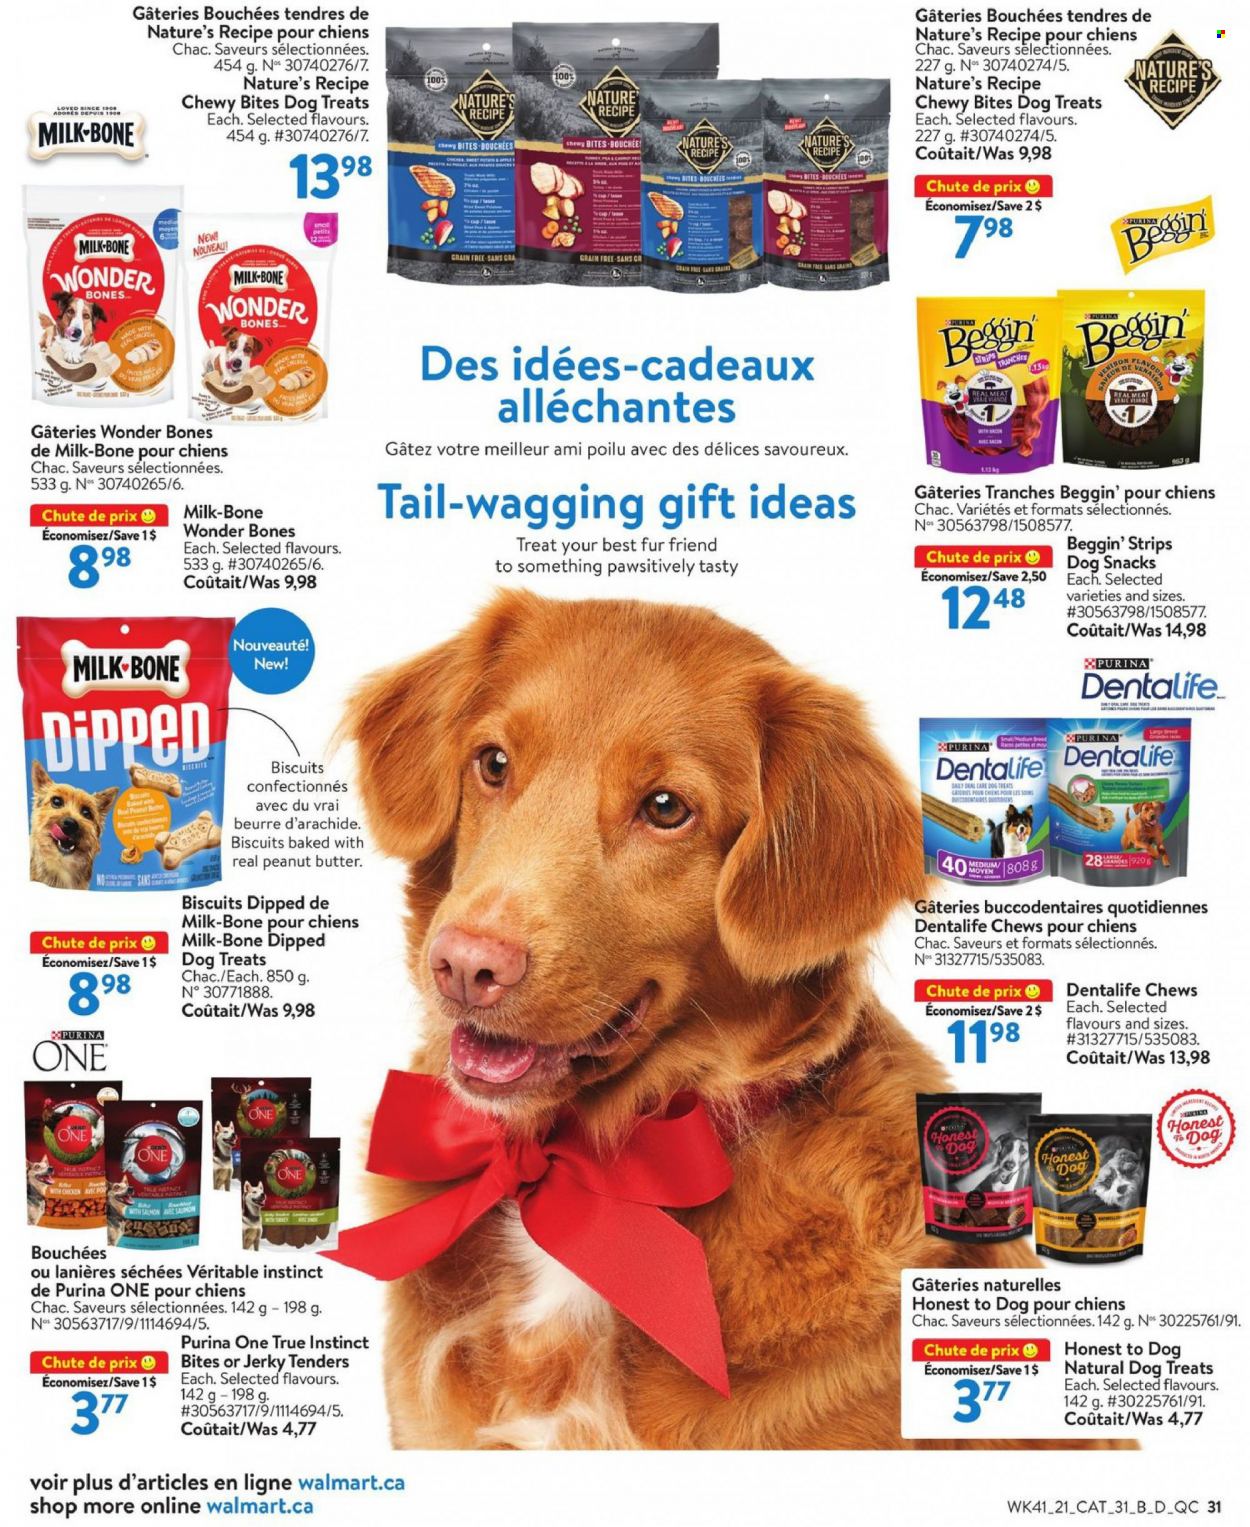 thumbnail - Walmart Flyer - November 04, 2021 - December 01, 2021 - Sales products - jerky, milk, strips, snack, chewing gum, peanut butter, Purina, Dentalife, Beggin'. Page 32.